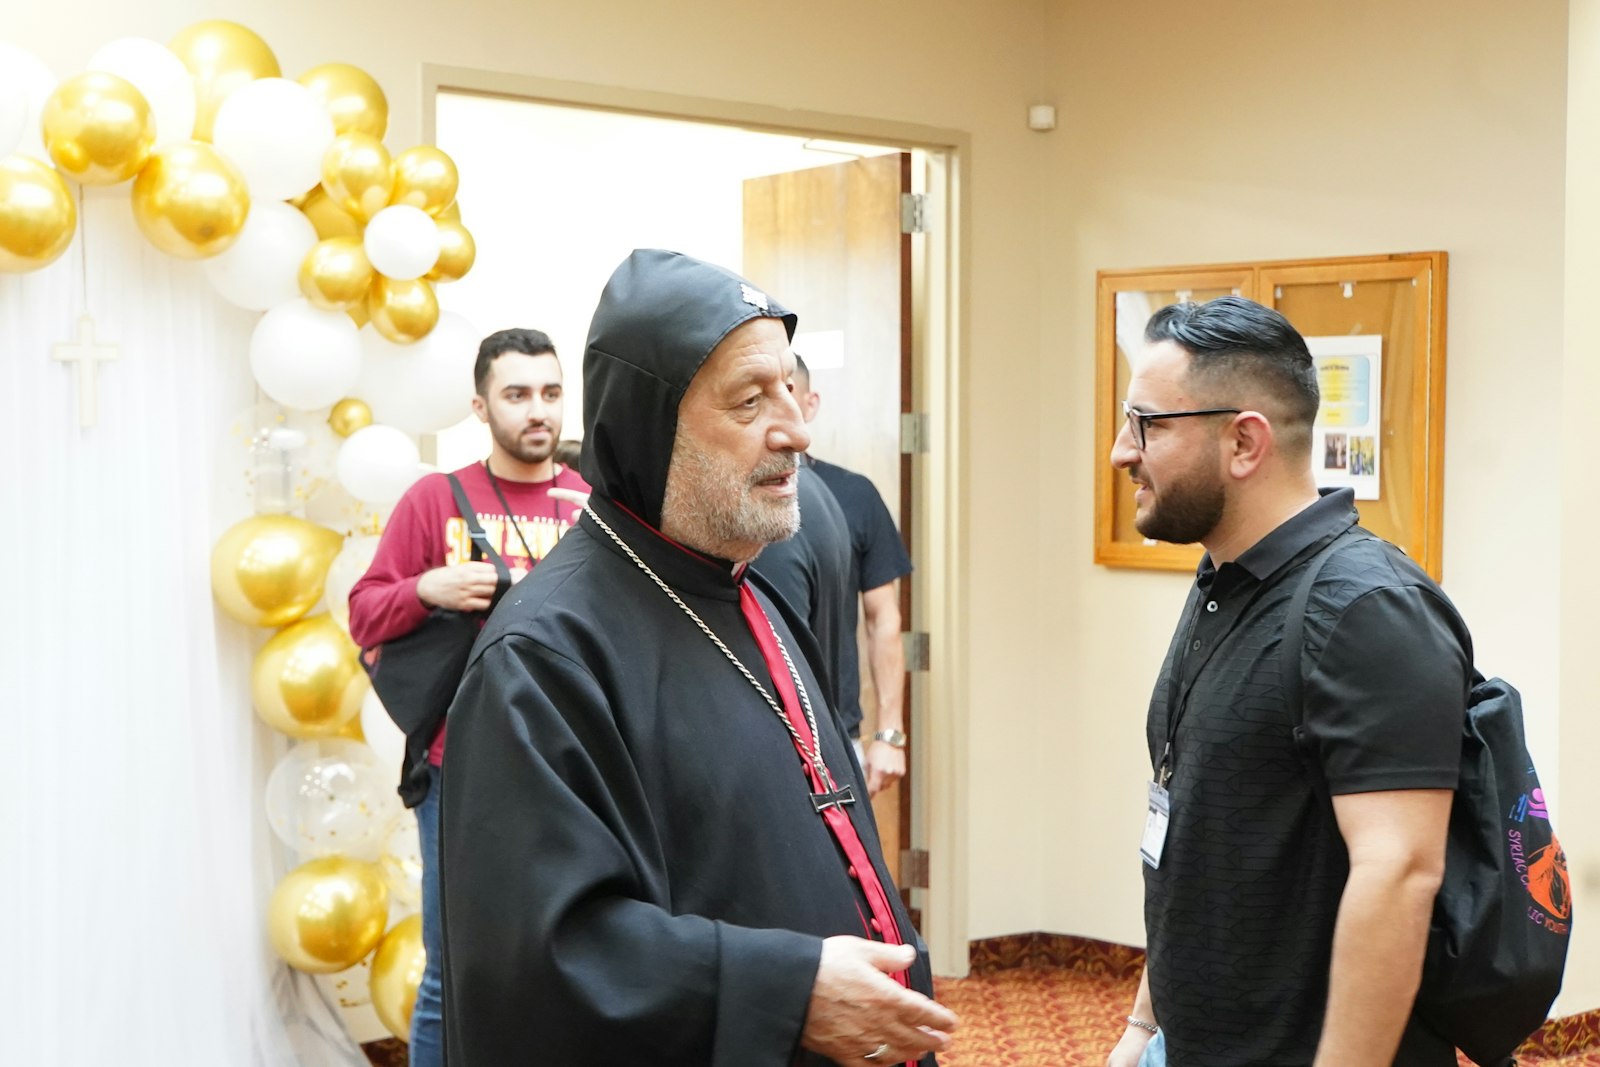 Bishop Barnaba Yousif Habash, bishop of the Eparchy Our Lady of Deliverance, the U.S.-wide eparchy for all Syriac Catholics, speaks with youth before the start of the 12th Syriac Catholic Youth Convention at St. Toma Syriac Cathedral in Farmington Hills on July 6. The convention is an opportunity for Syriac youth to come together to share in the faith.